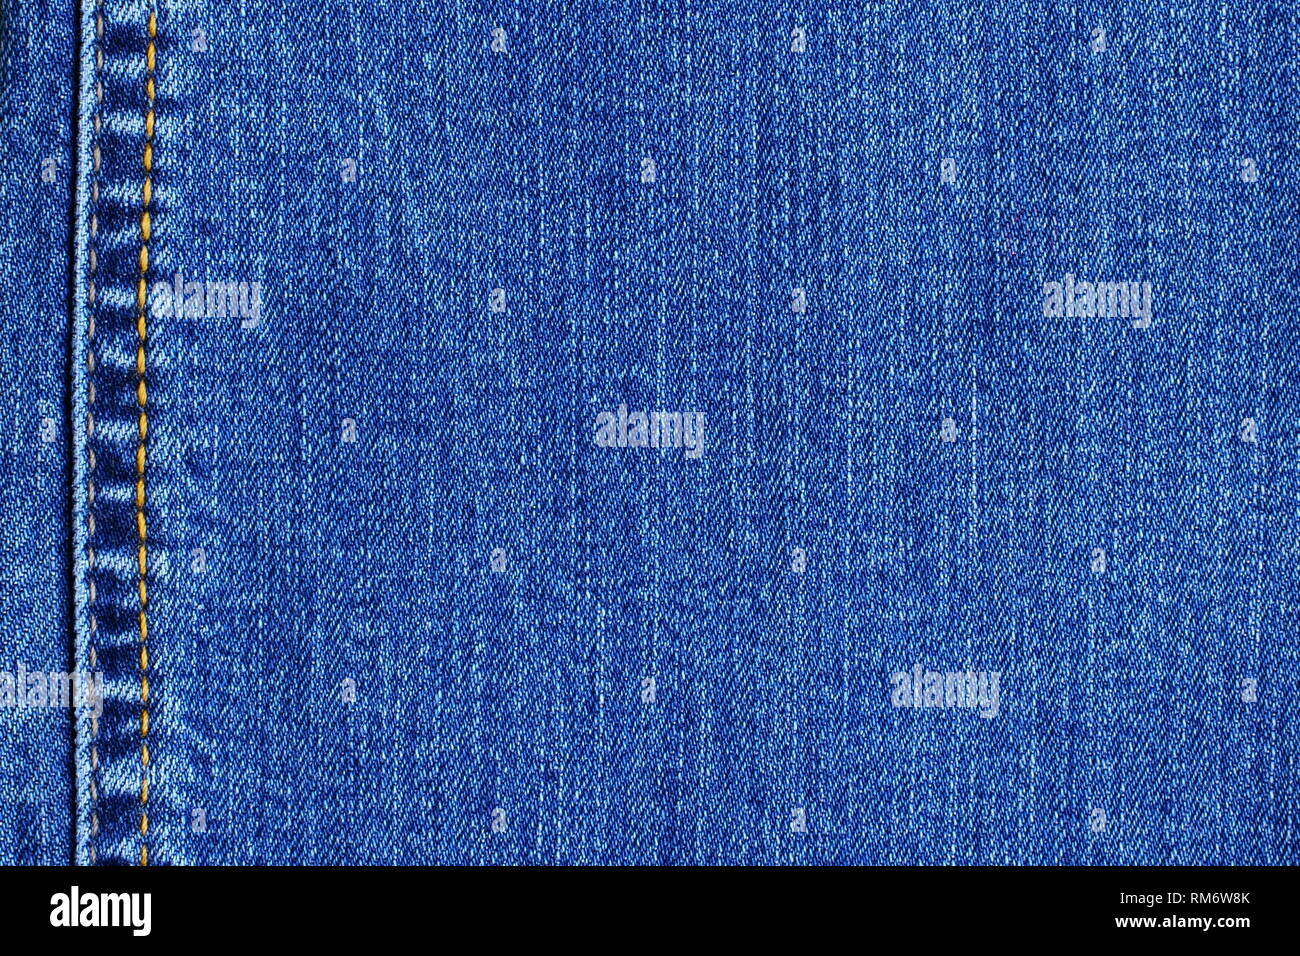 Blue denim jeans background. Fabric, texture backdrop for design purposes. Stock Photo